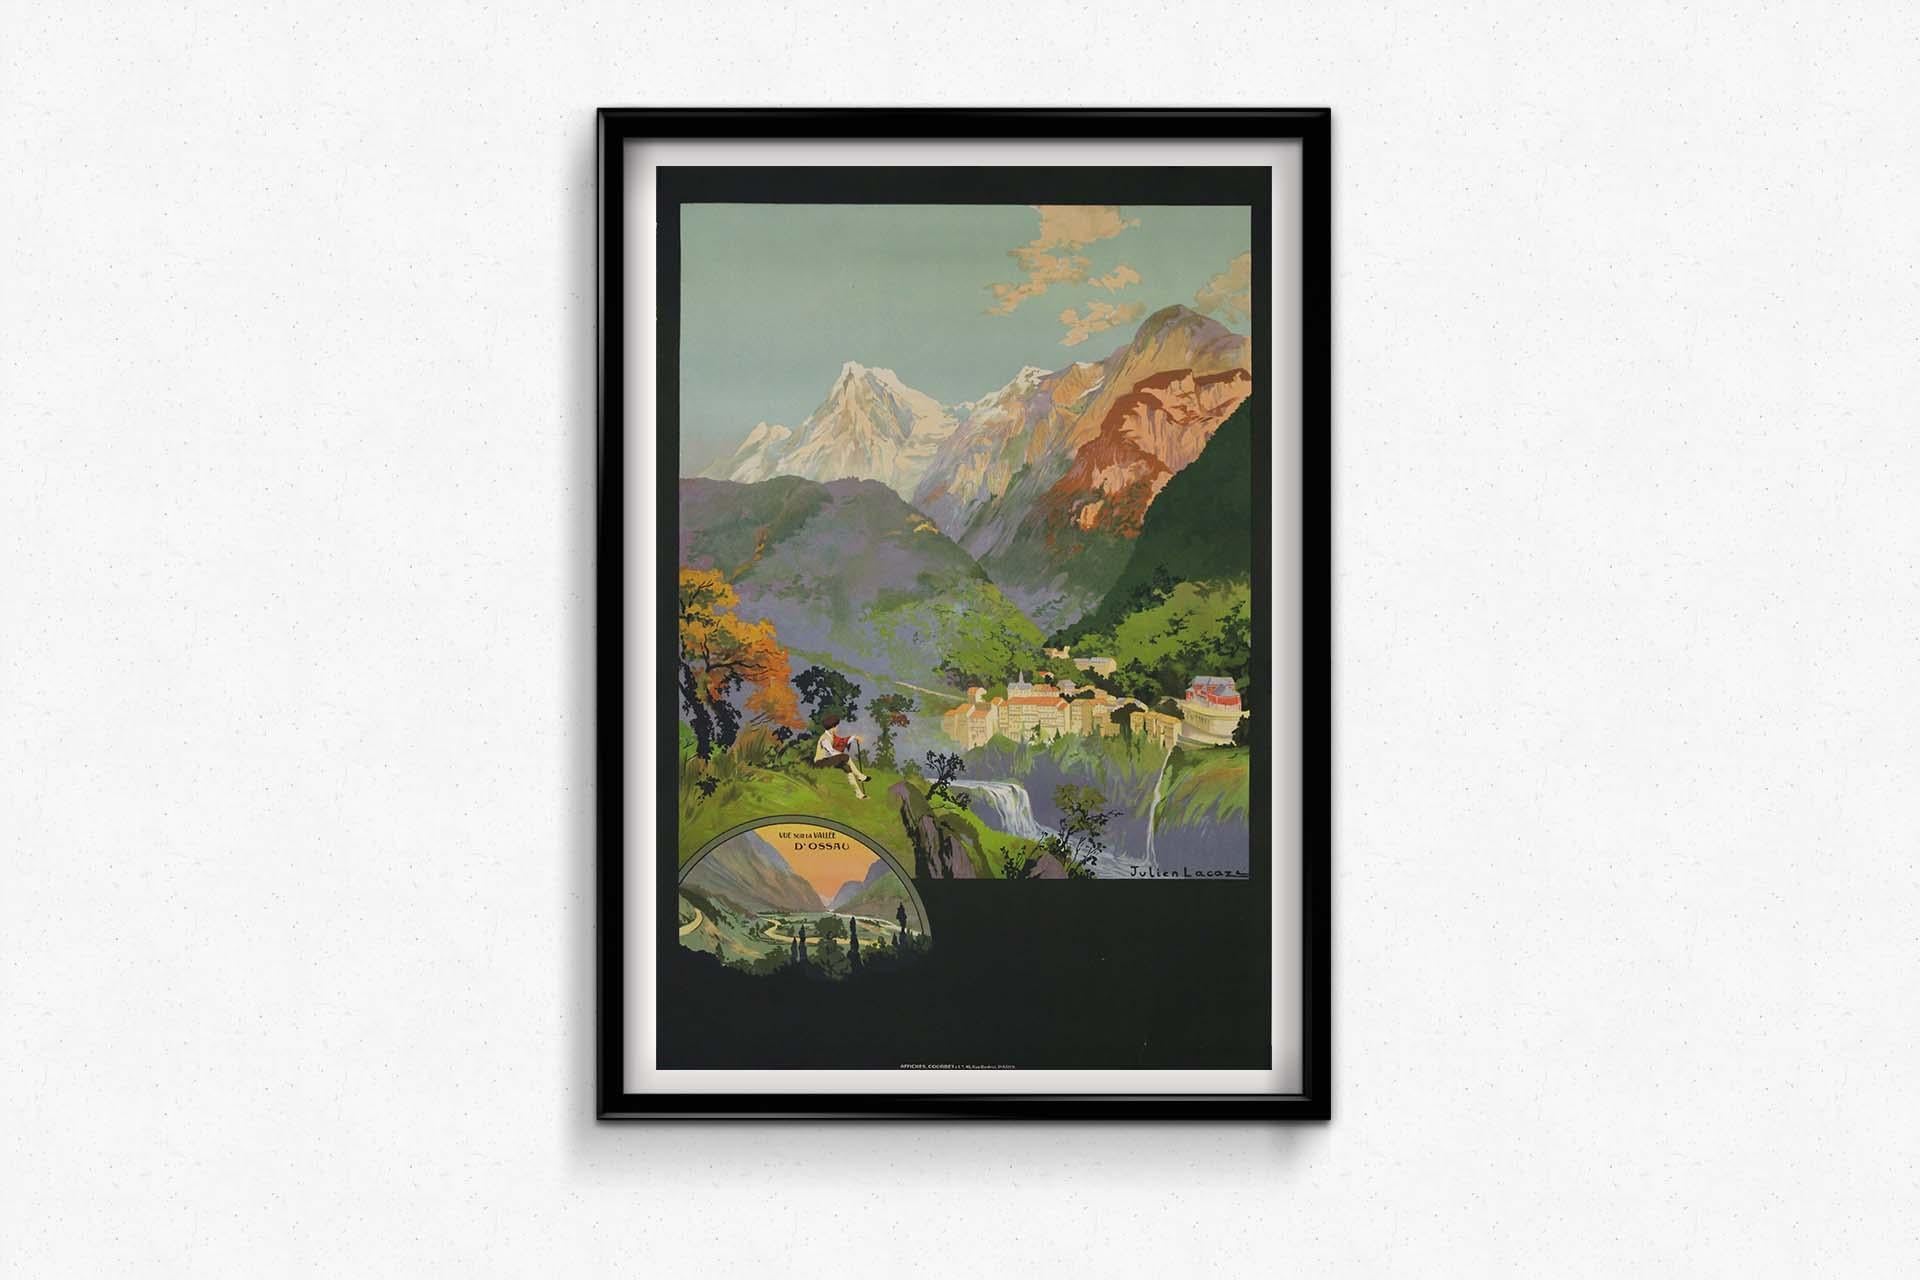 Crafted around 1925 by the talented artist Julien Lacaze, the original travel poster titled 